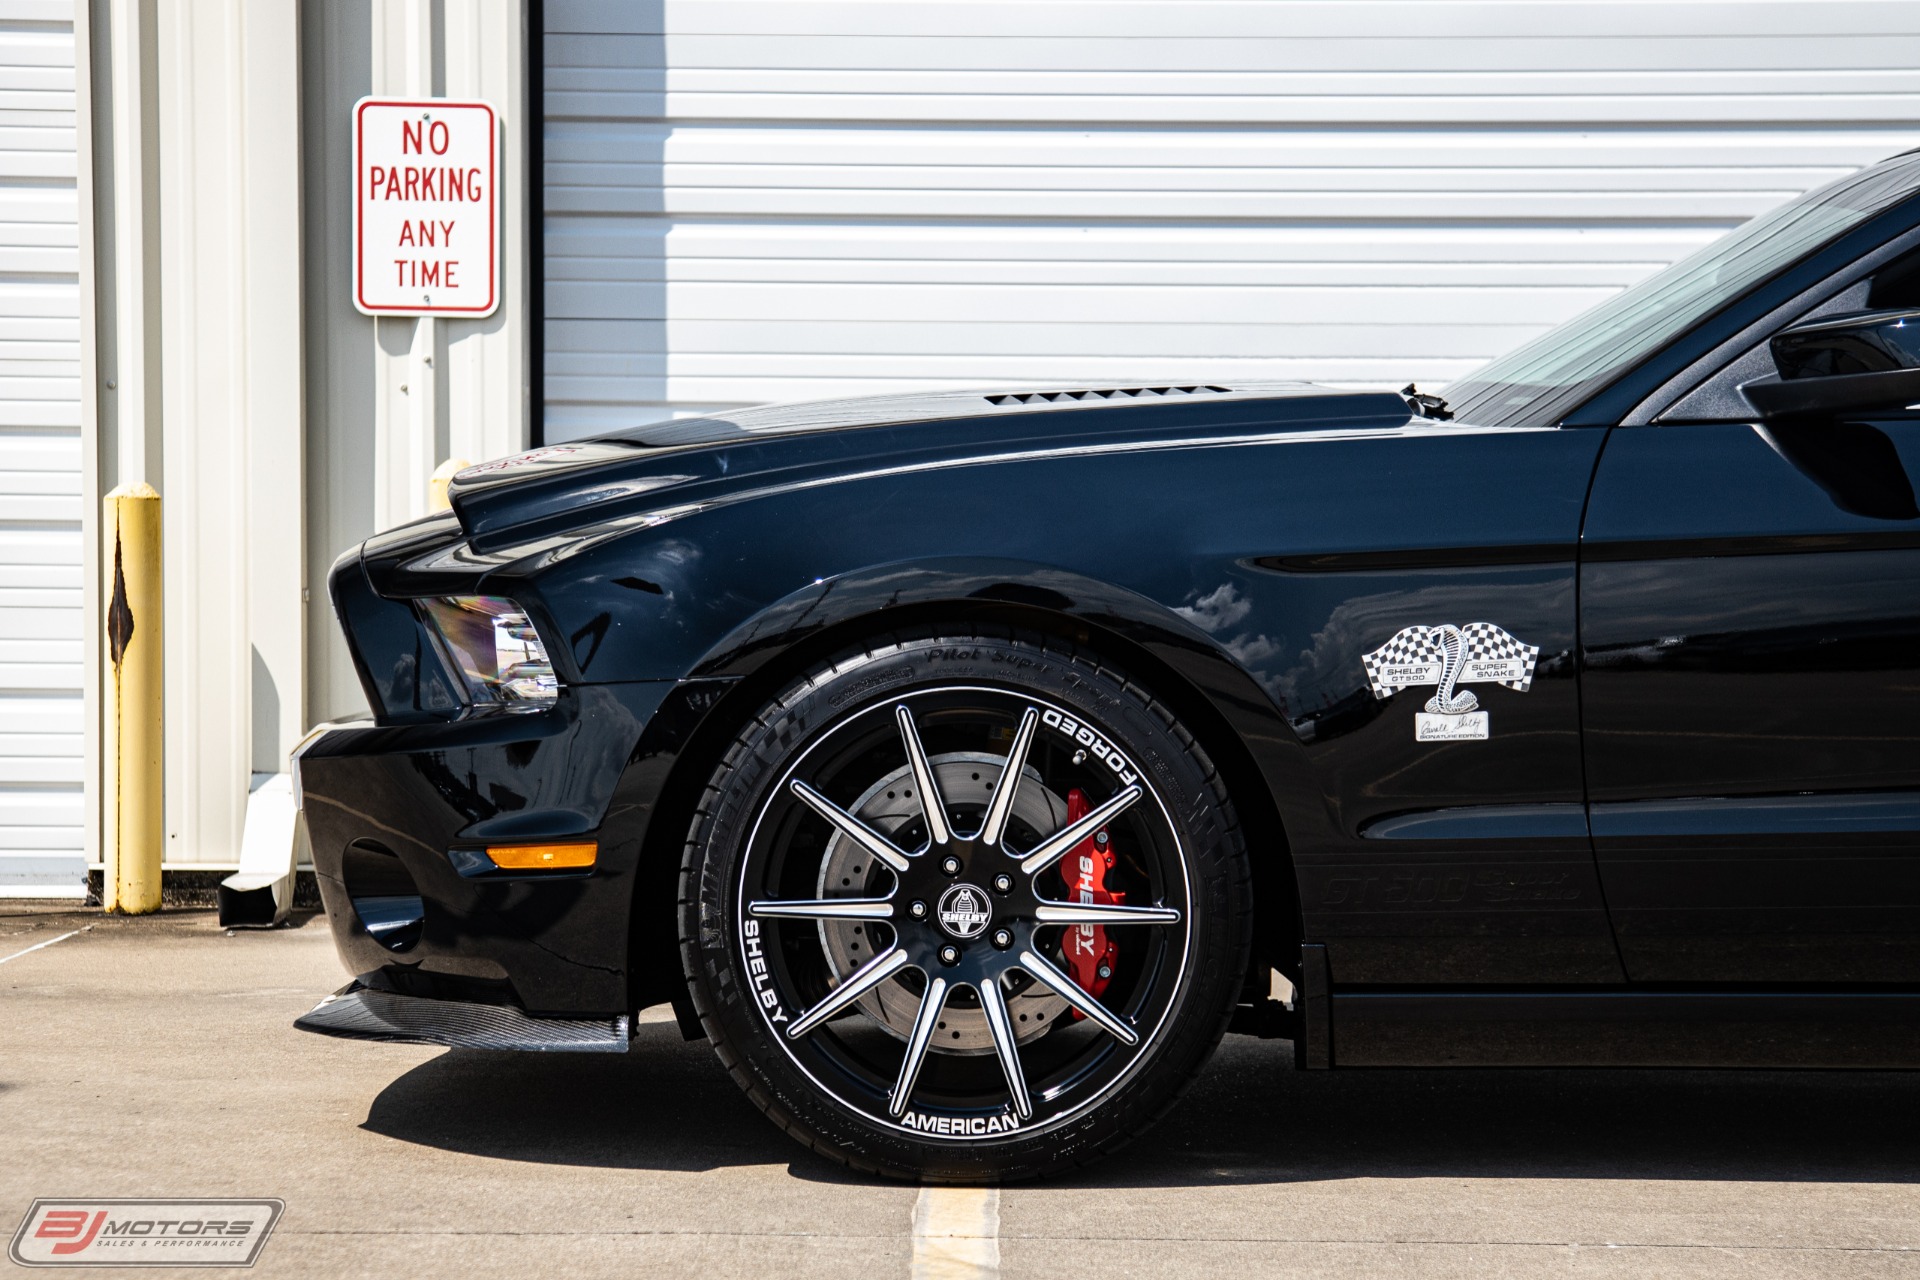 Used-2014-Ford-Mustang-Shelby-Super-Snake-Signature-Edition